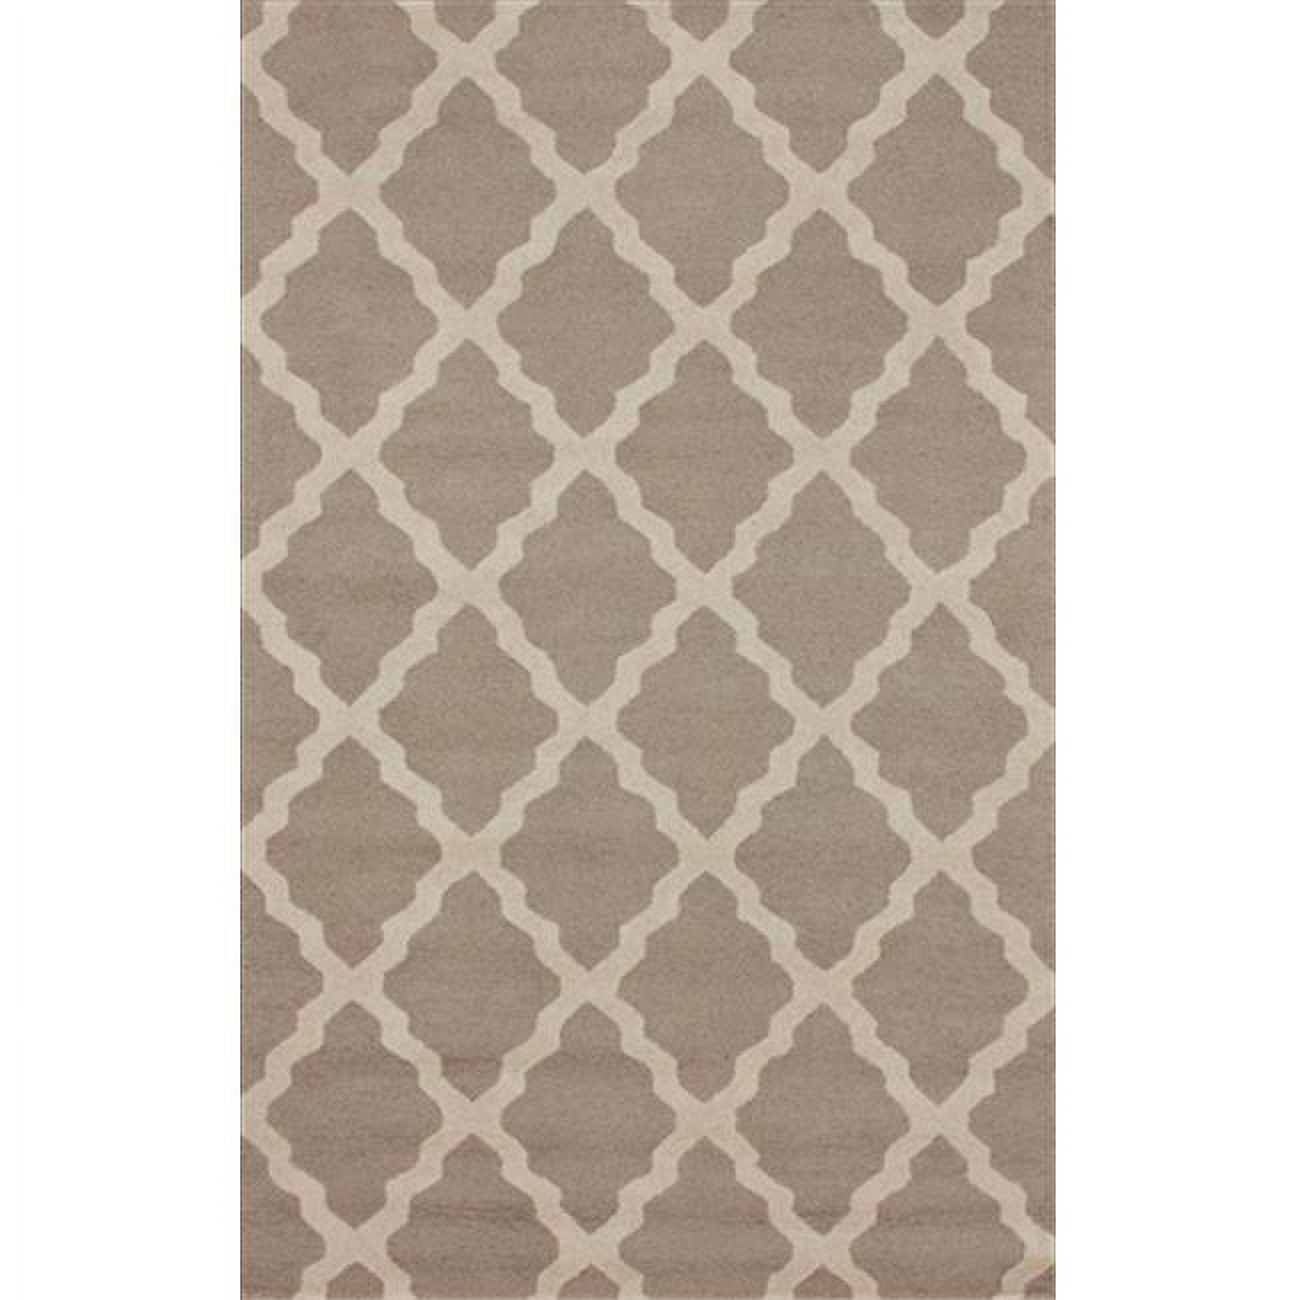 NuLoom MTVS27A-606R 6 ft. x 6 ft. Moroccan Trellis Tan Hand Hooked Round Rug  